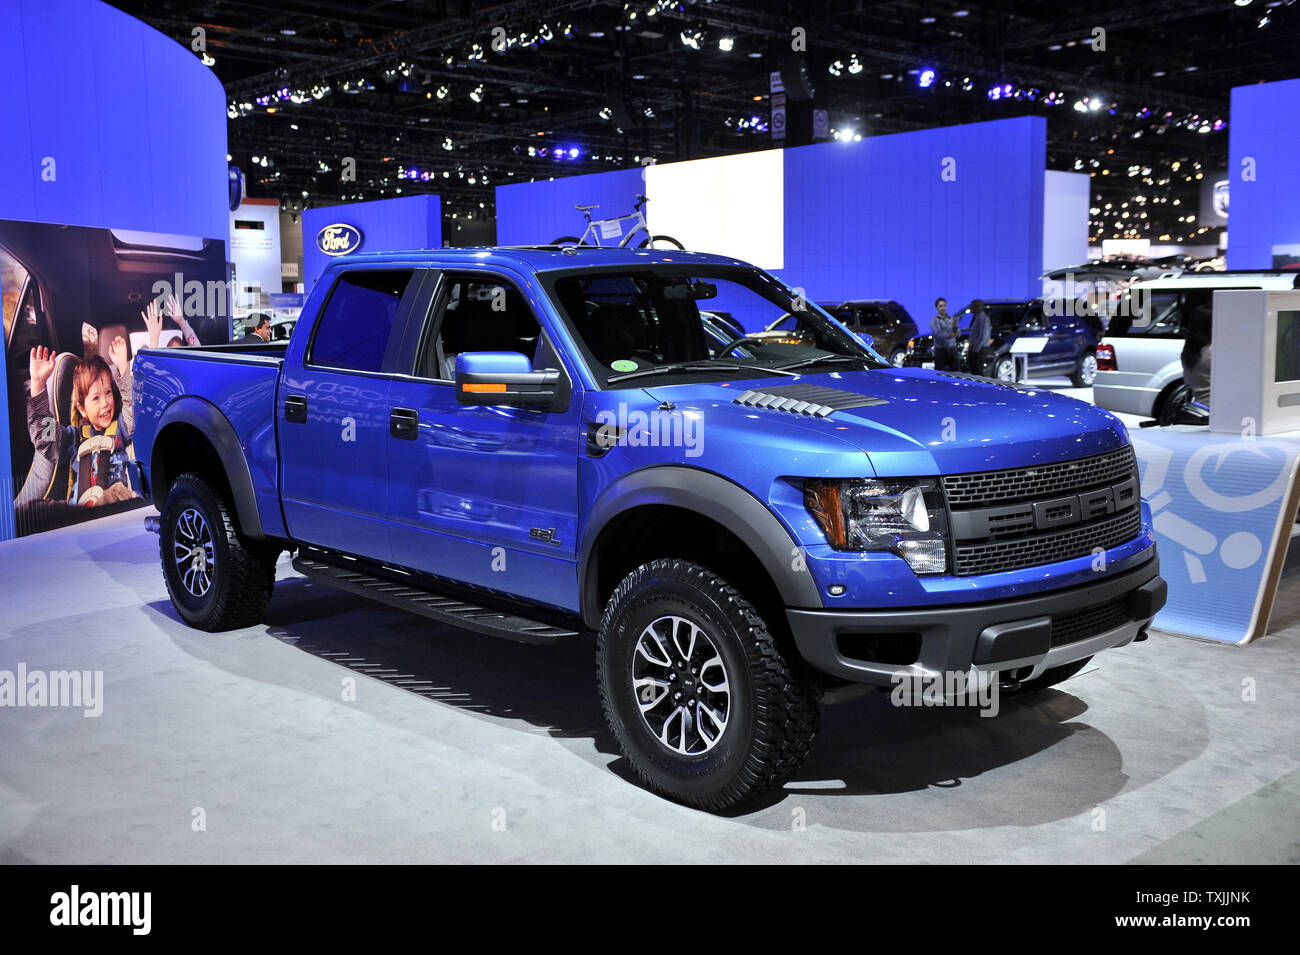 A Ford F-150 SVT Raptor is shown during the Chicago Auto Show at McCormick Place on February 9, 2012 in Chicago.      UPI/Brian Kersey Stock Photo